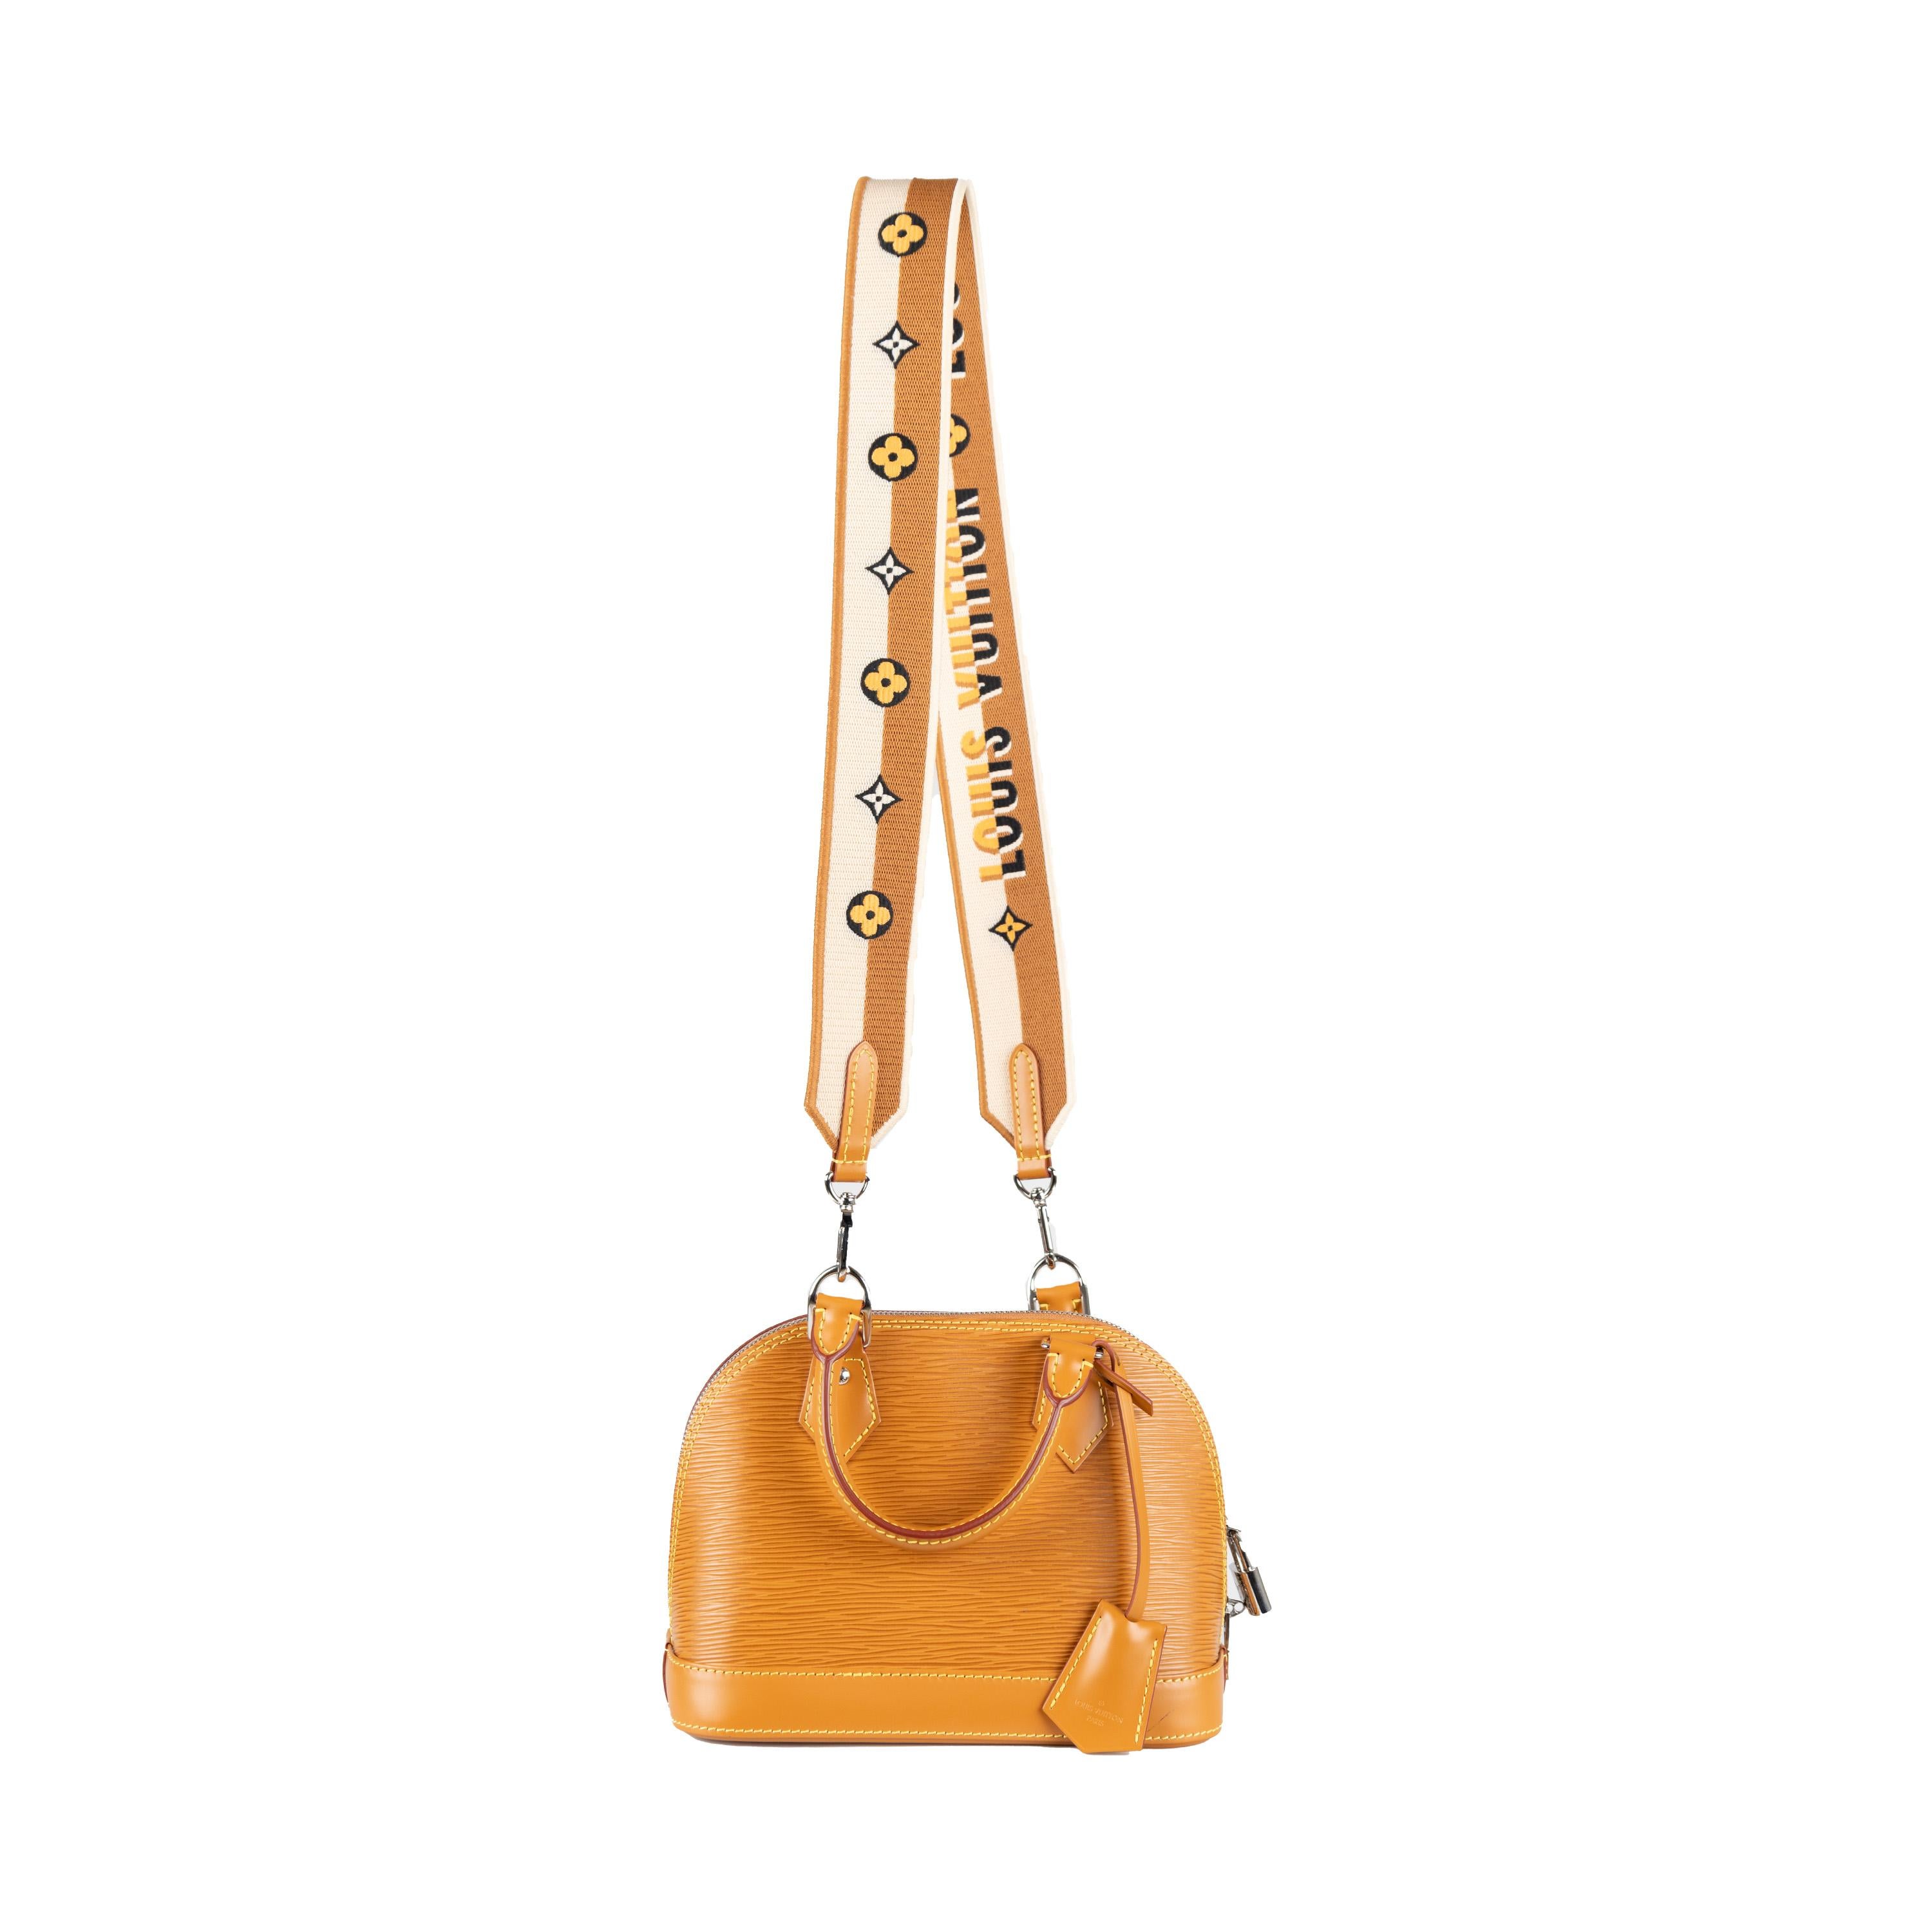 The Louis Vuitton Epi Alma BB Handbag is exquisitely crafted in signature epi leather with texture. The honey gold exterior is complemented by cowhide rolled leather top handles and a detachable shoulder strap for convenient portability. Crafted